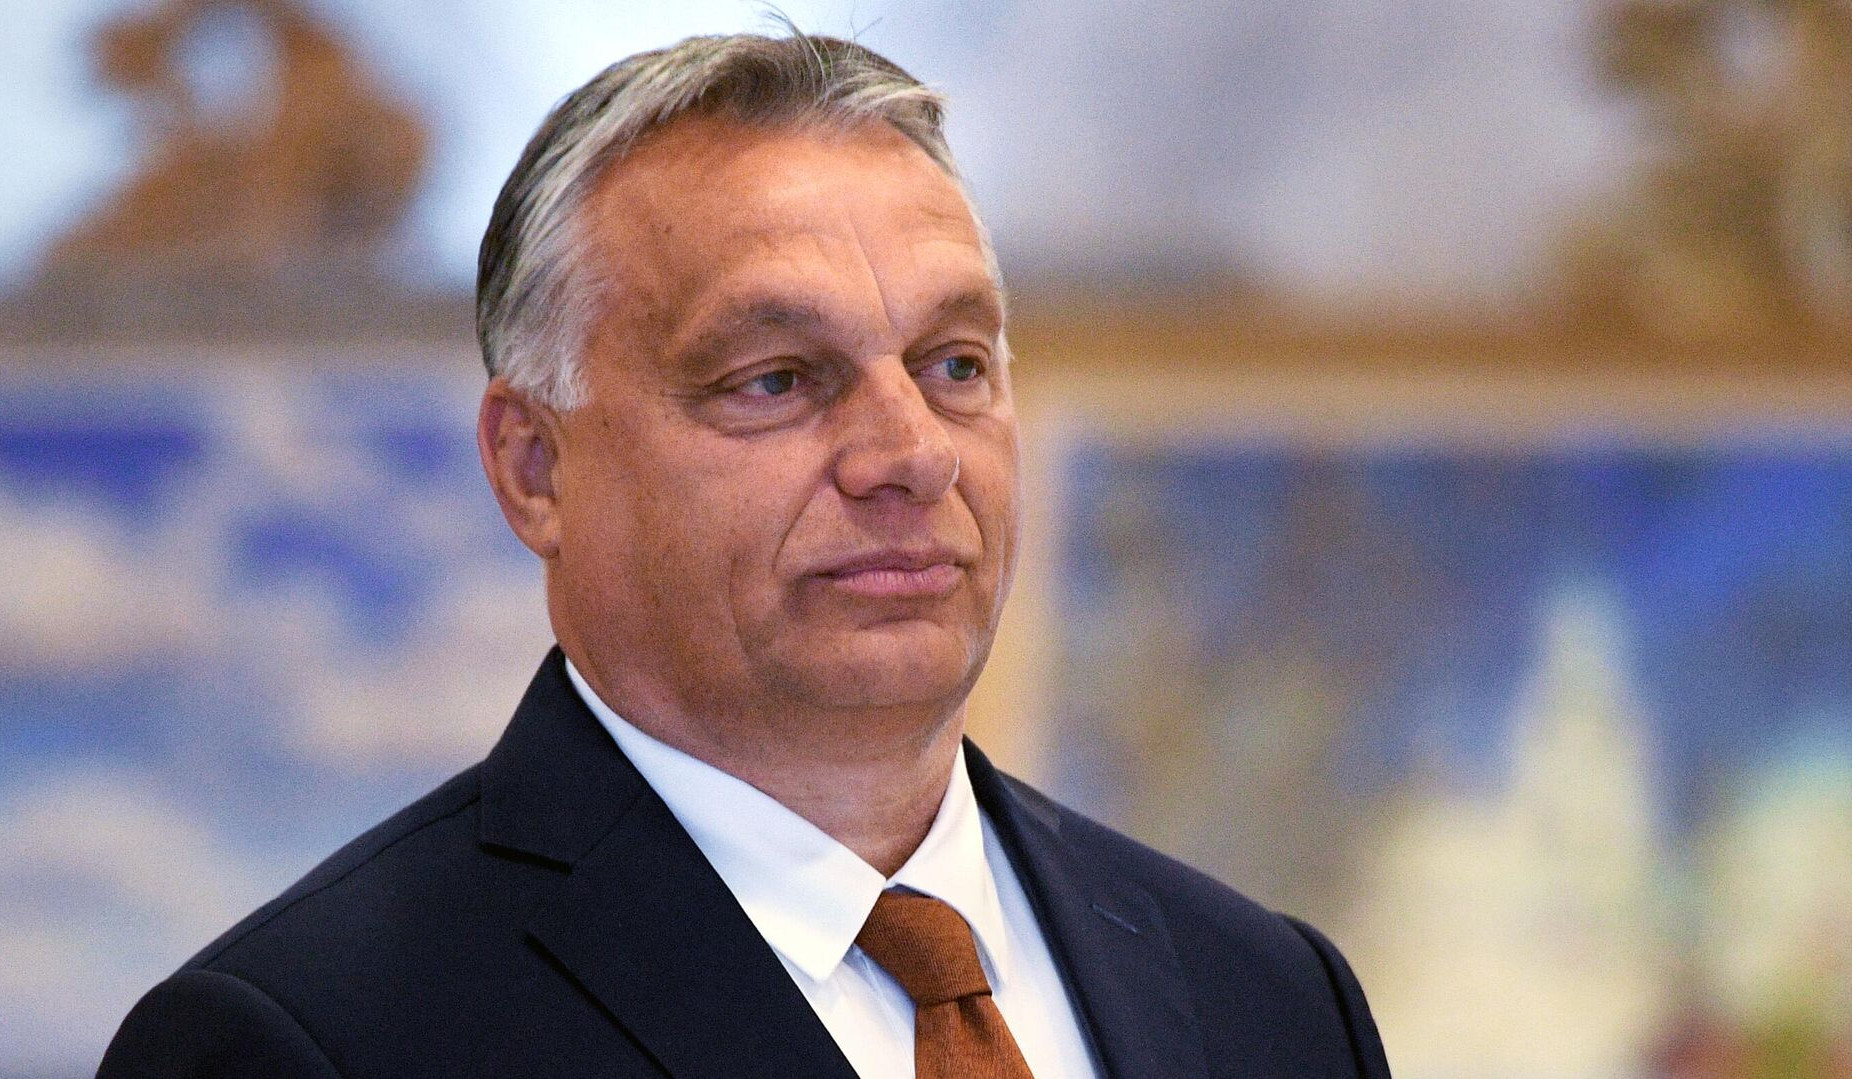 Need to prepare for war: Hungarian PM Orban warns EU economy will fall over sanctions